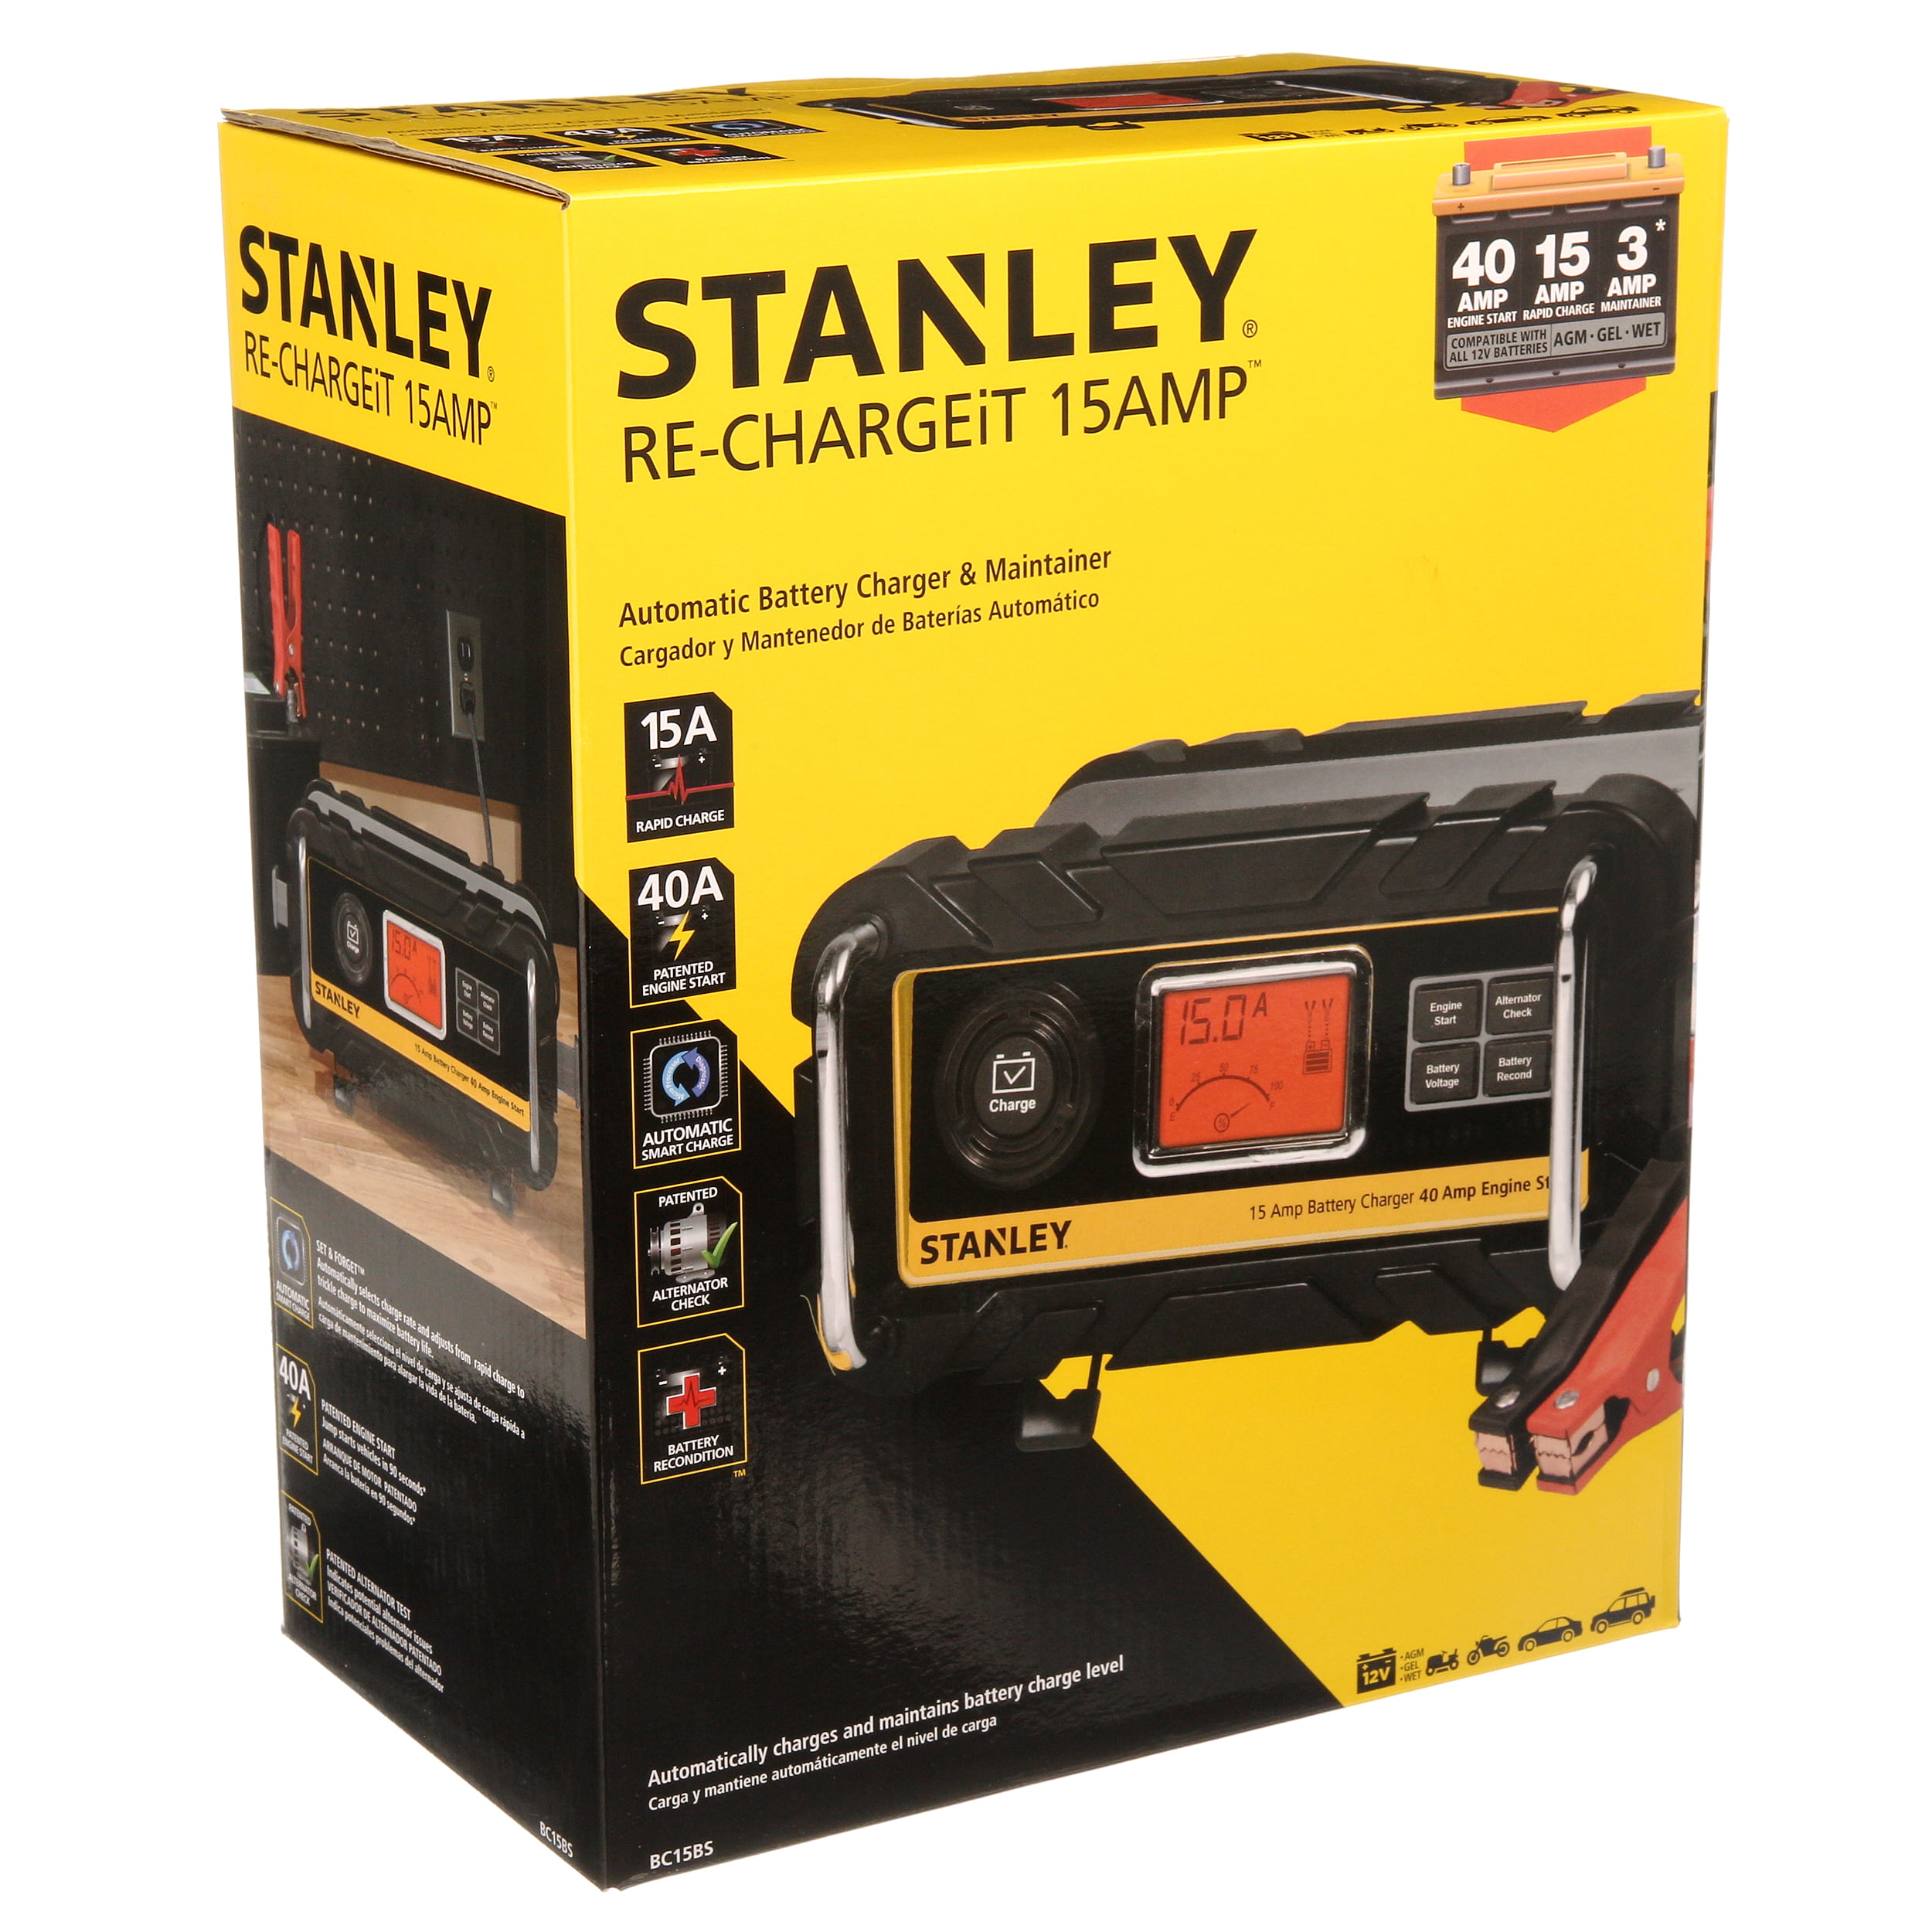 STANLEY 15 Amp Battery Charger with 40 Amp Engine Start (BC15BS) 